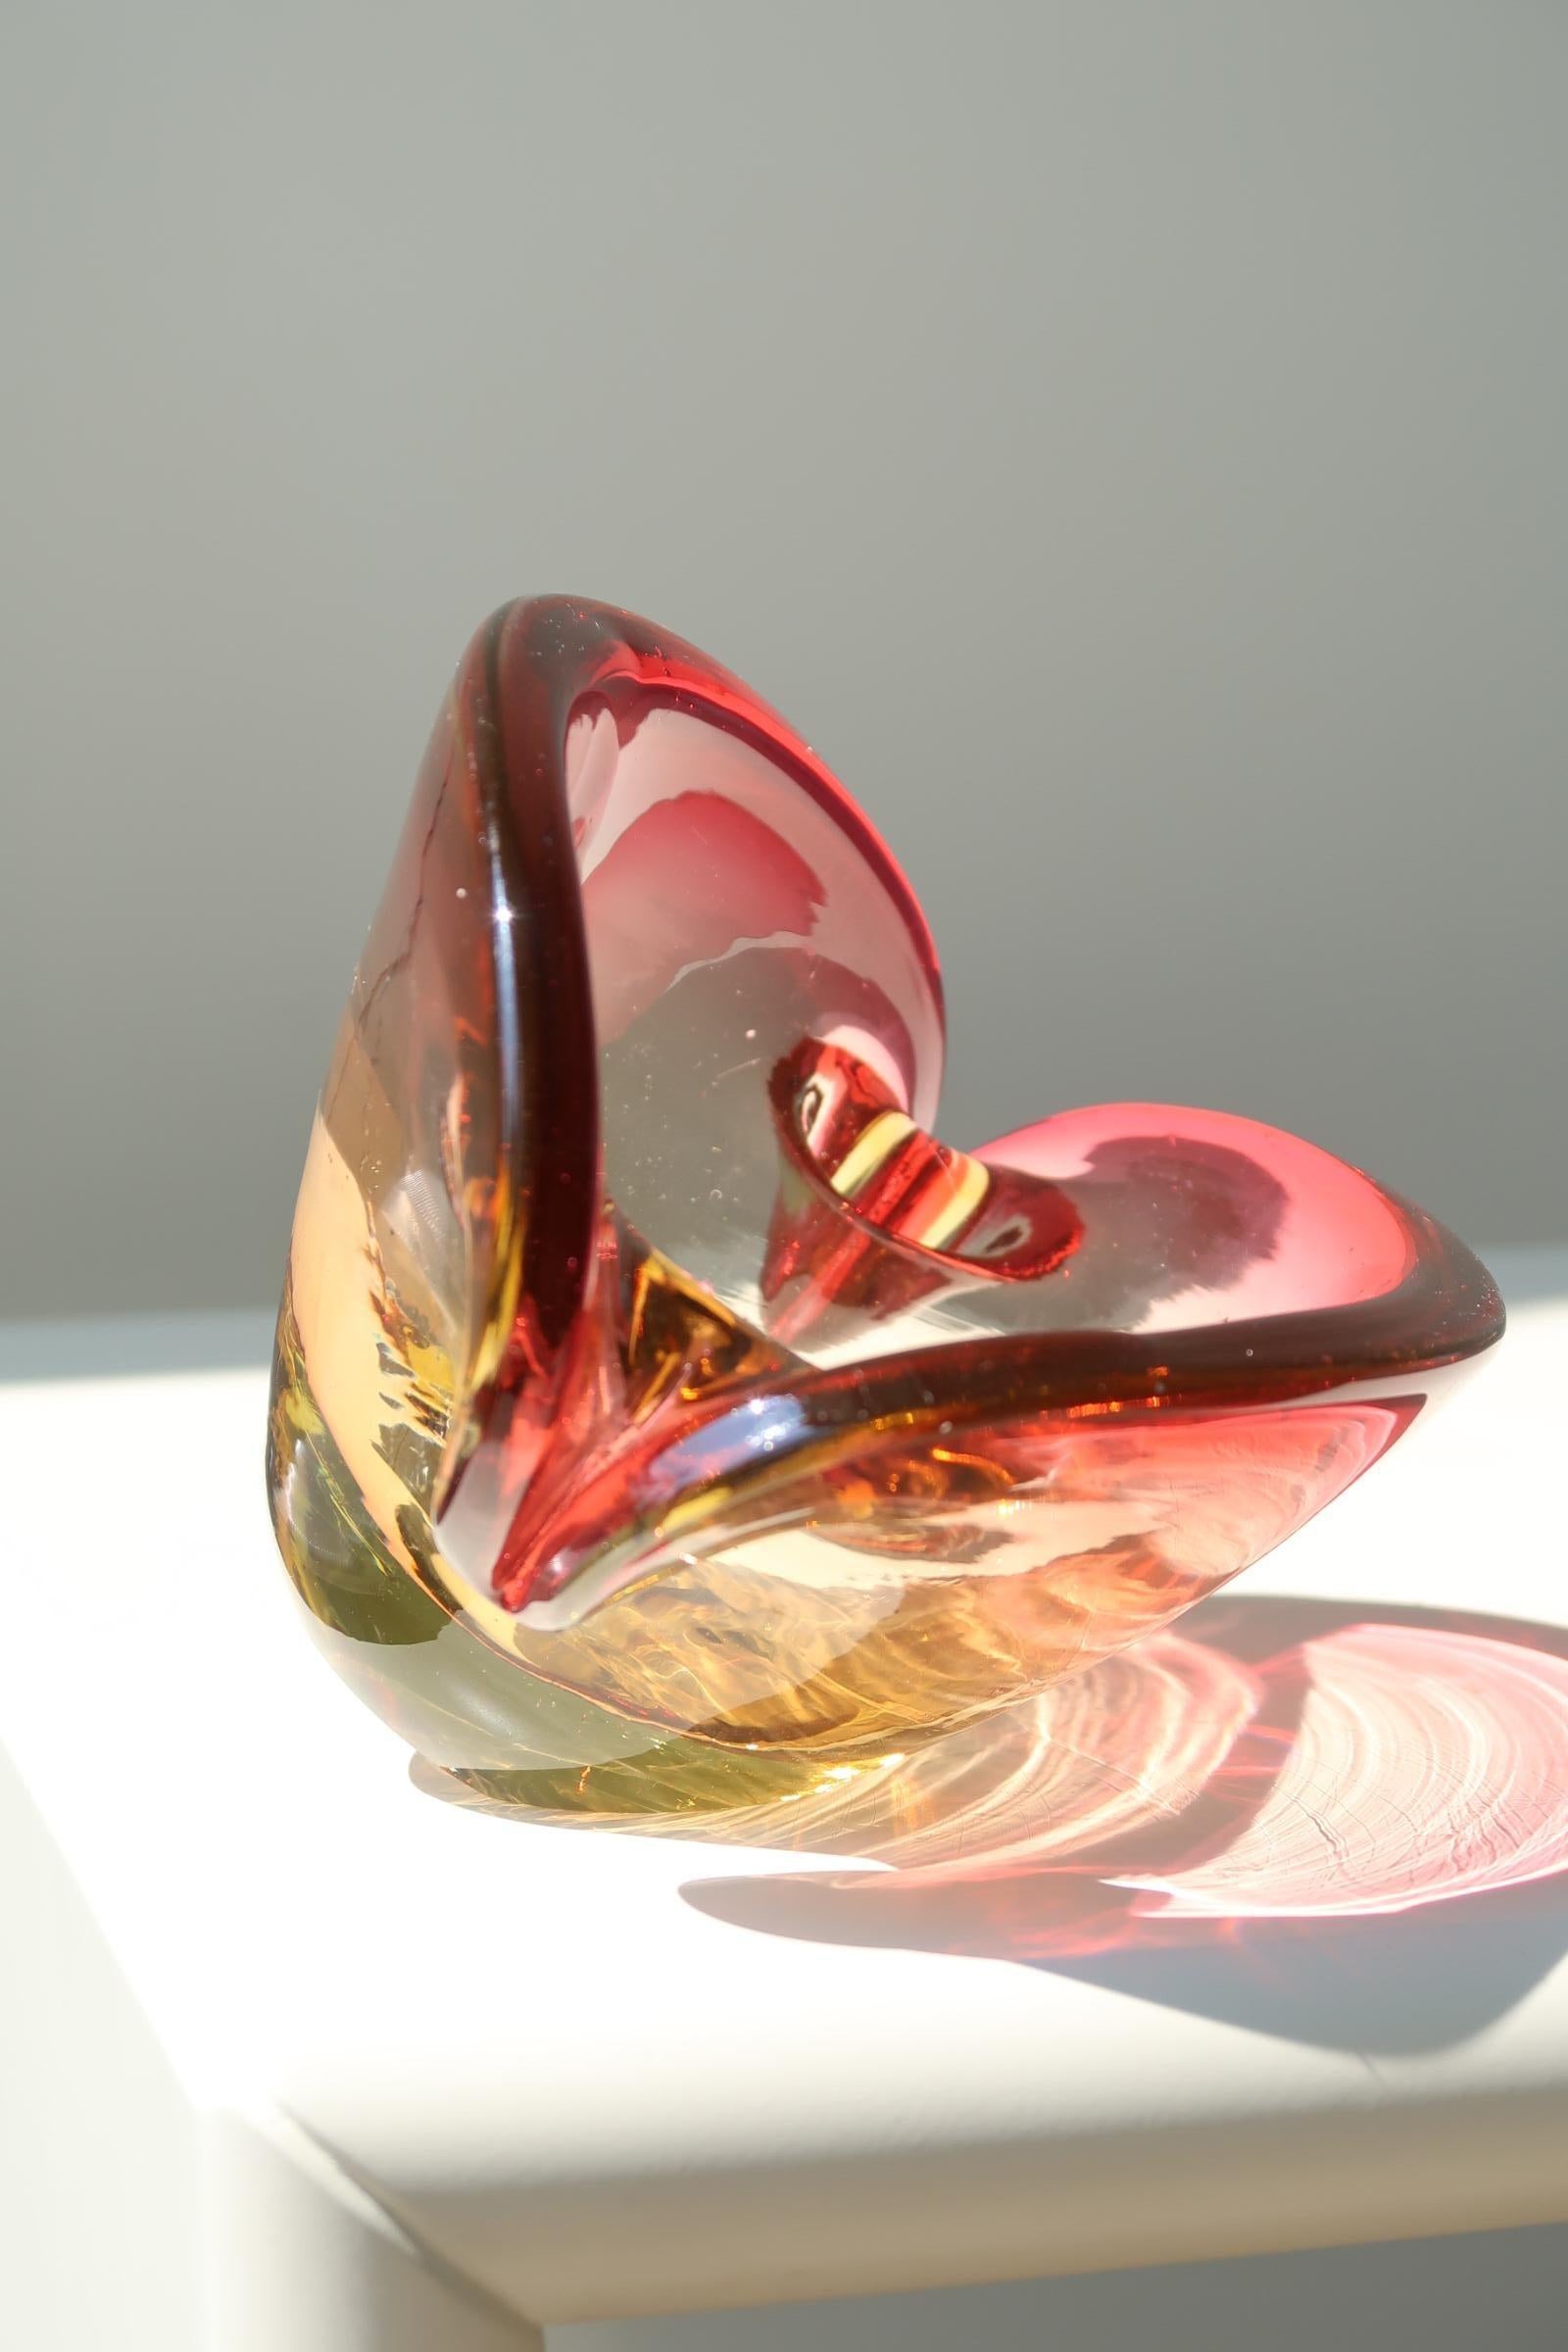 Vintage Murano clam bowl, mouth-blown in the Sommerso technique in red and yellow transparent glass. The clam has two bases and can either stand upright or tip on its side. Parts of the original sticker are still visible. Has normal signs of use.